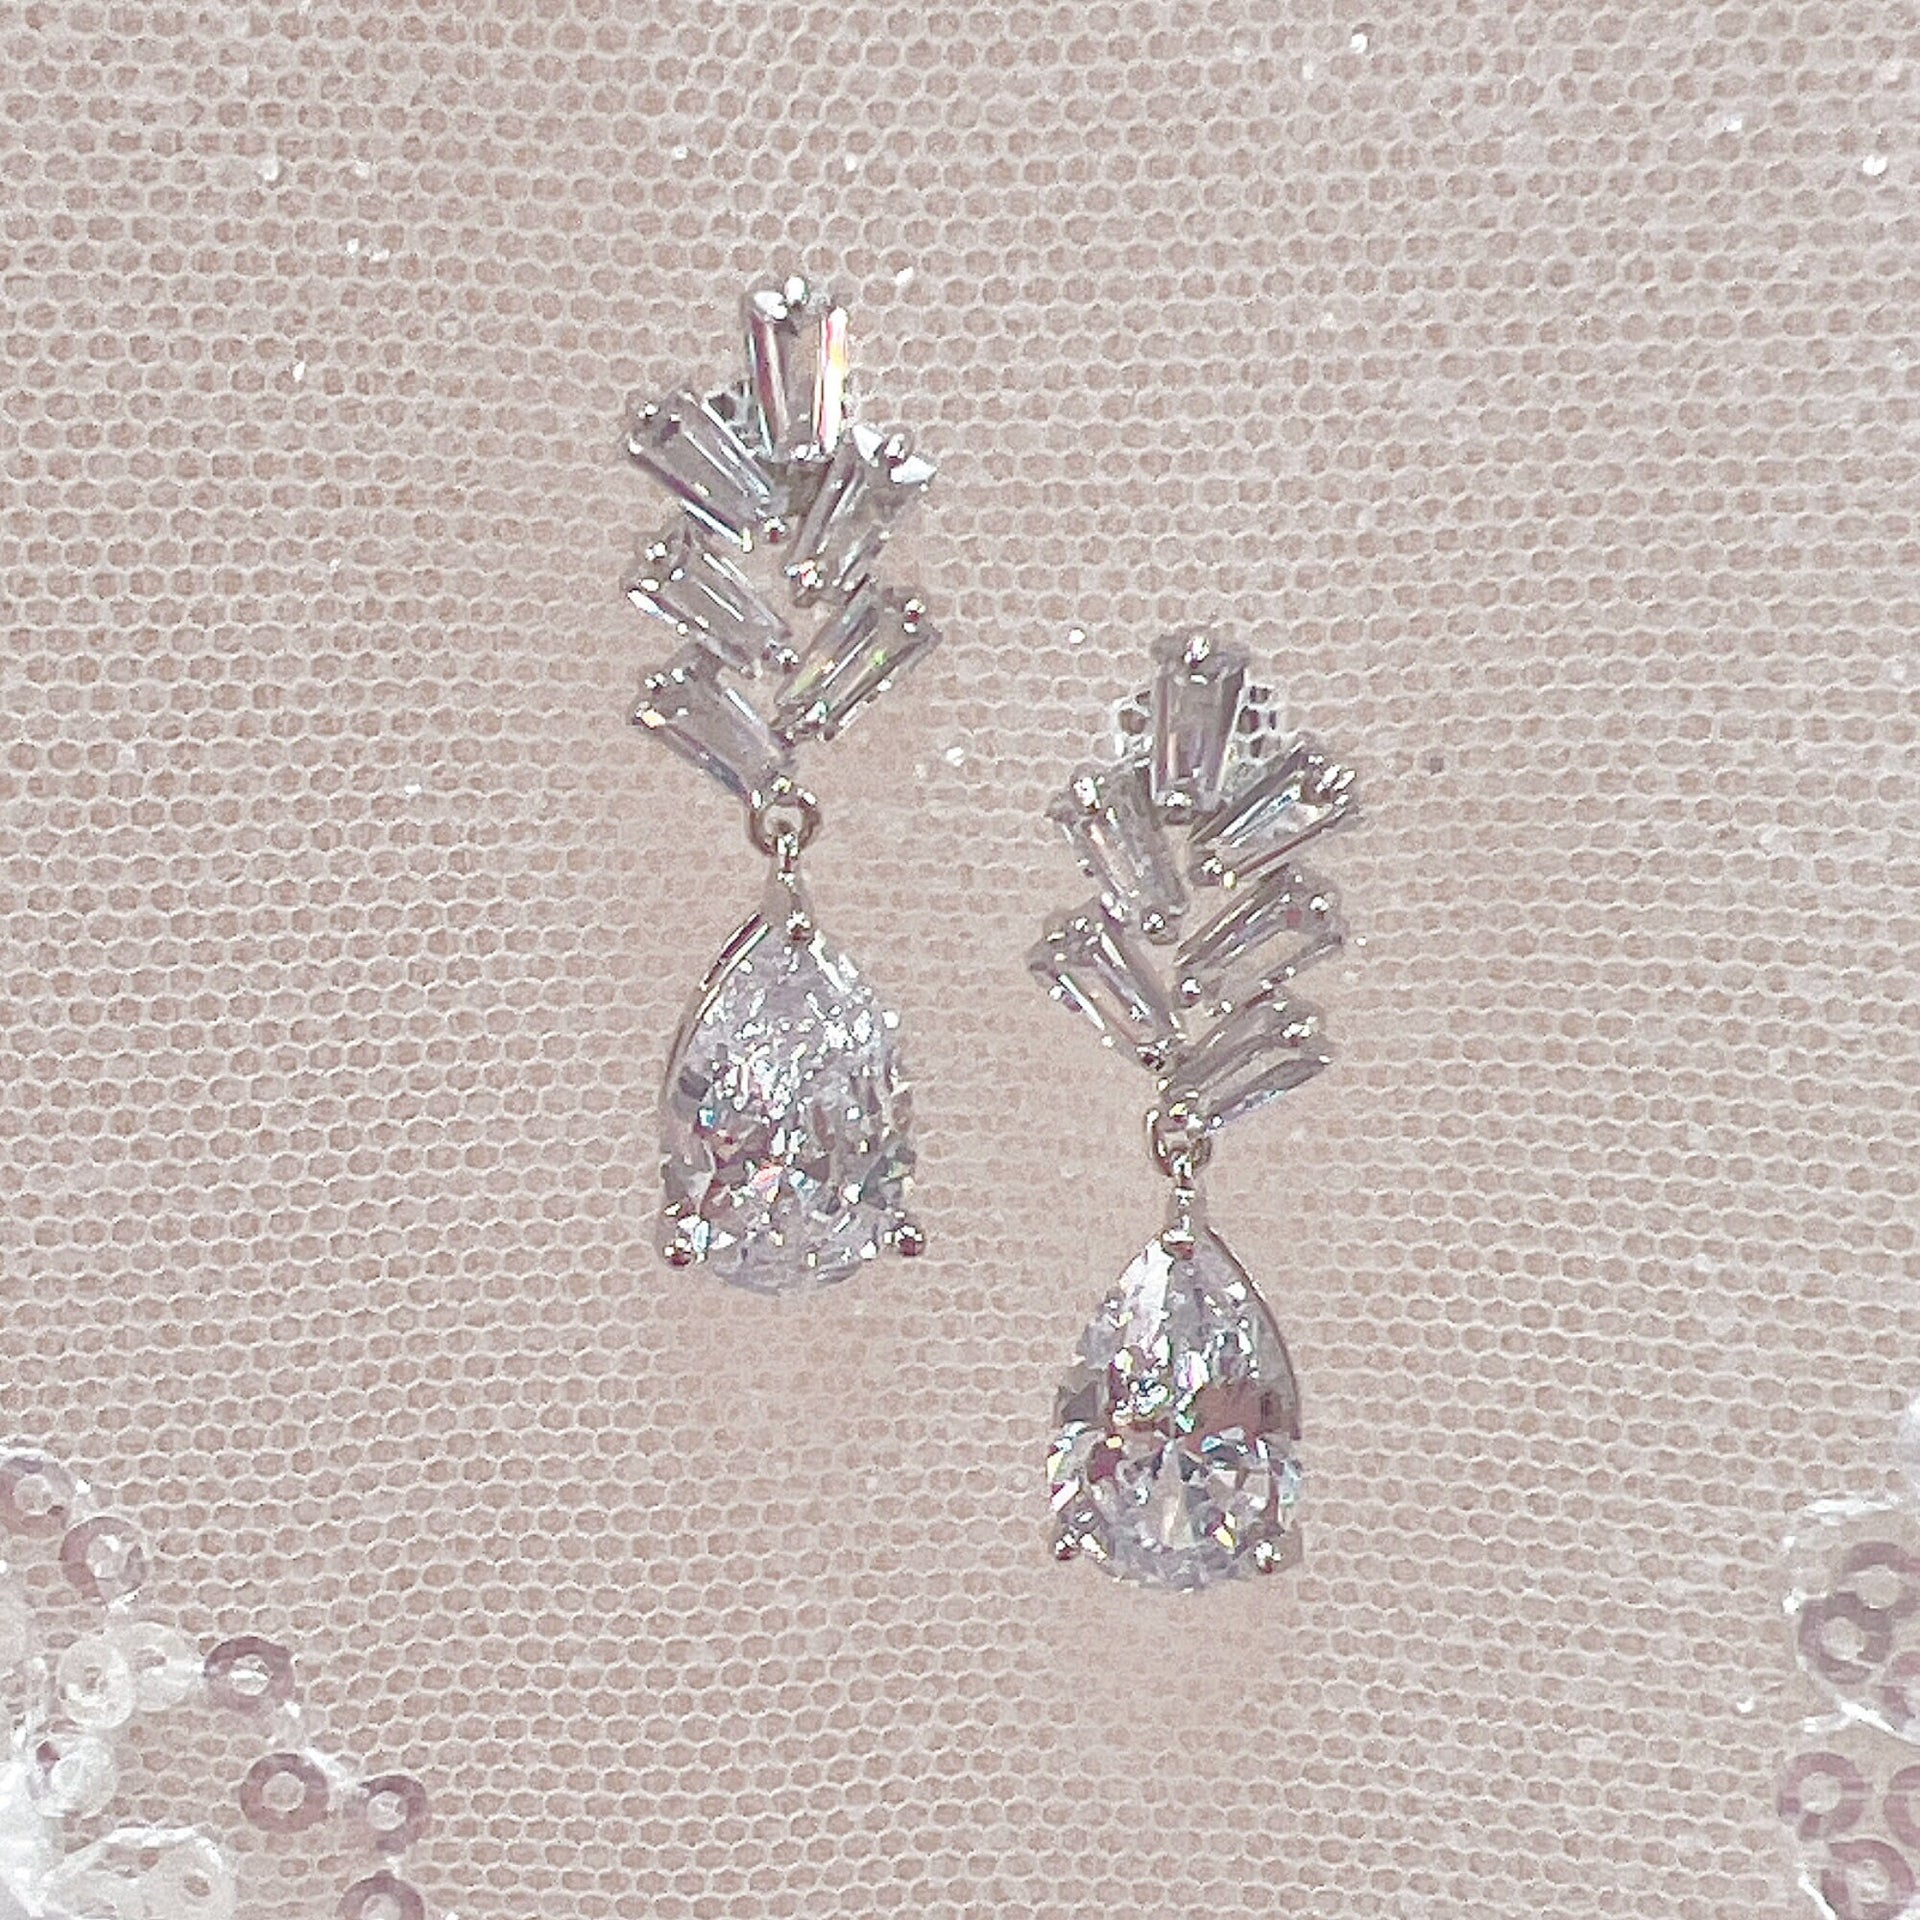 Sparkly CZ Earrings